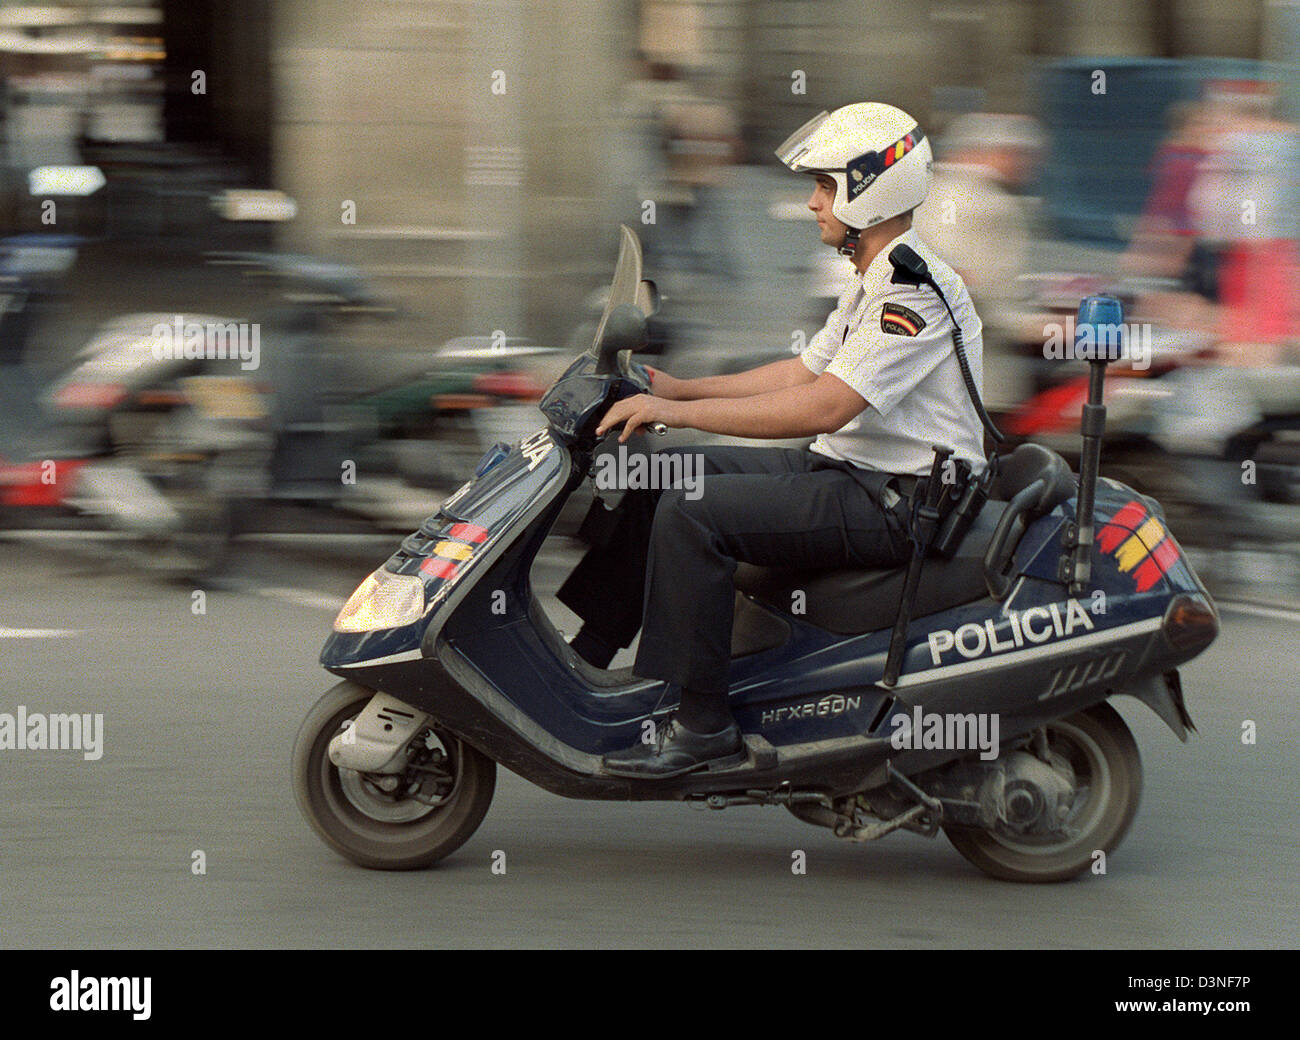 (FILE) The picture shows a police officer of the self-governed Catalan police Mossos dÂEsquadra, Barcelona, Spain, 10 June 2002. The Mossos dÂEsquadra is in charge for generals' buildings and premises in the city, while the municipal Guárdia Urbana is responsible for traffic. Photo: Thorsten Lang Stock Photo